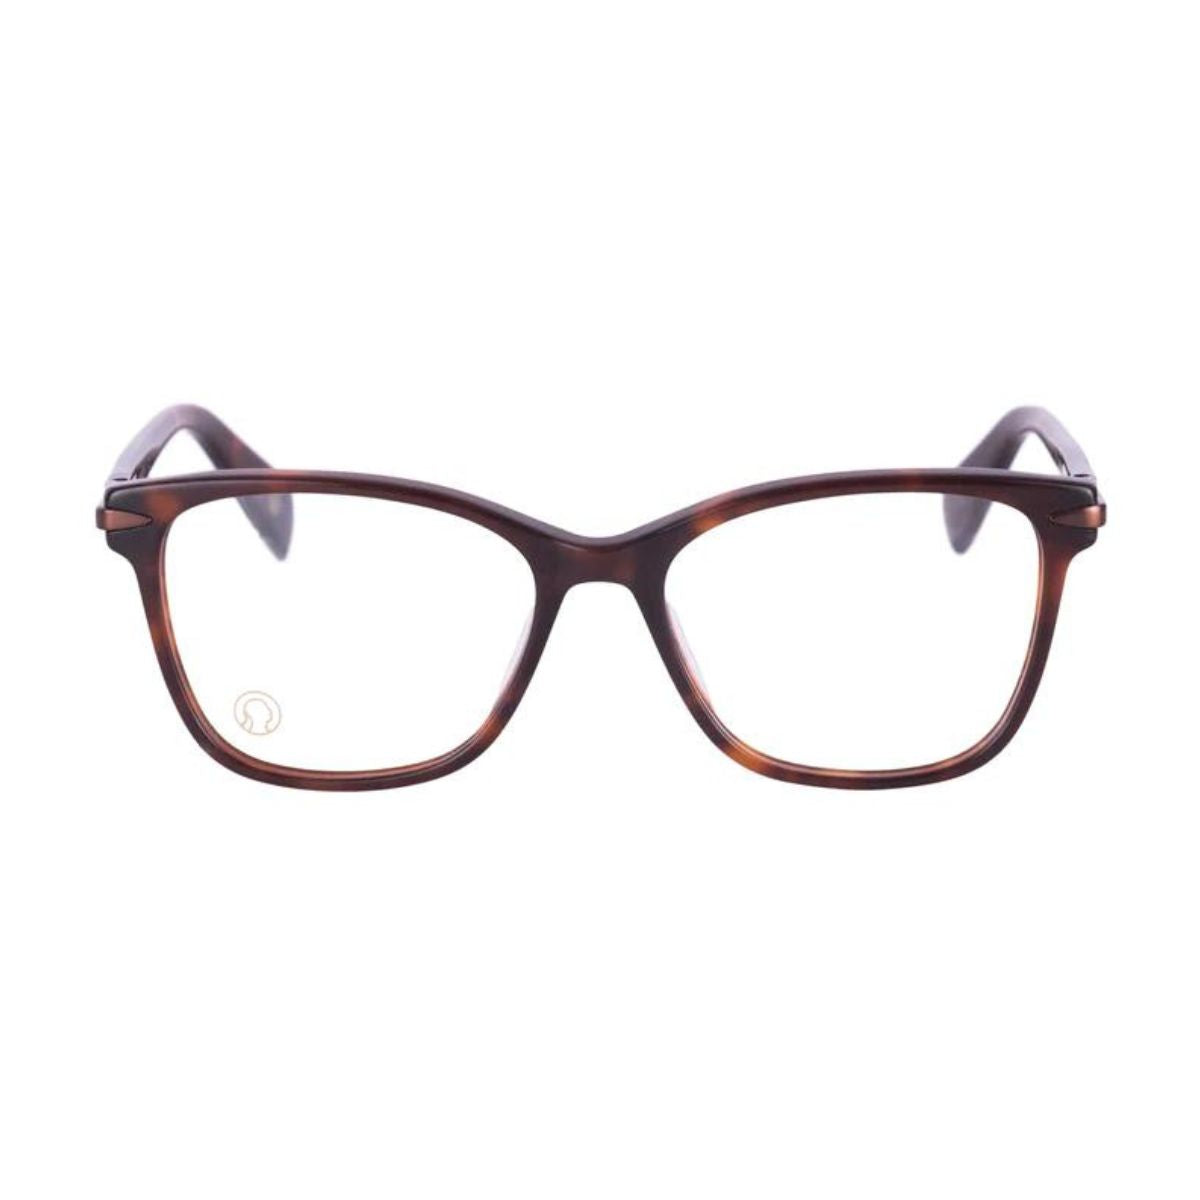 "stylish The Monk Florence C2 eye spectacles frames for women's at optorium"